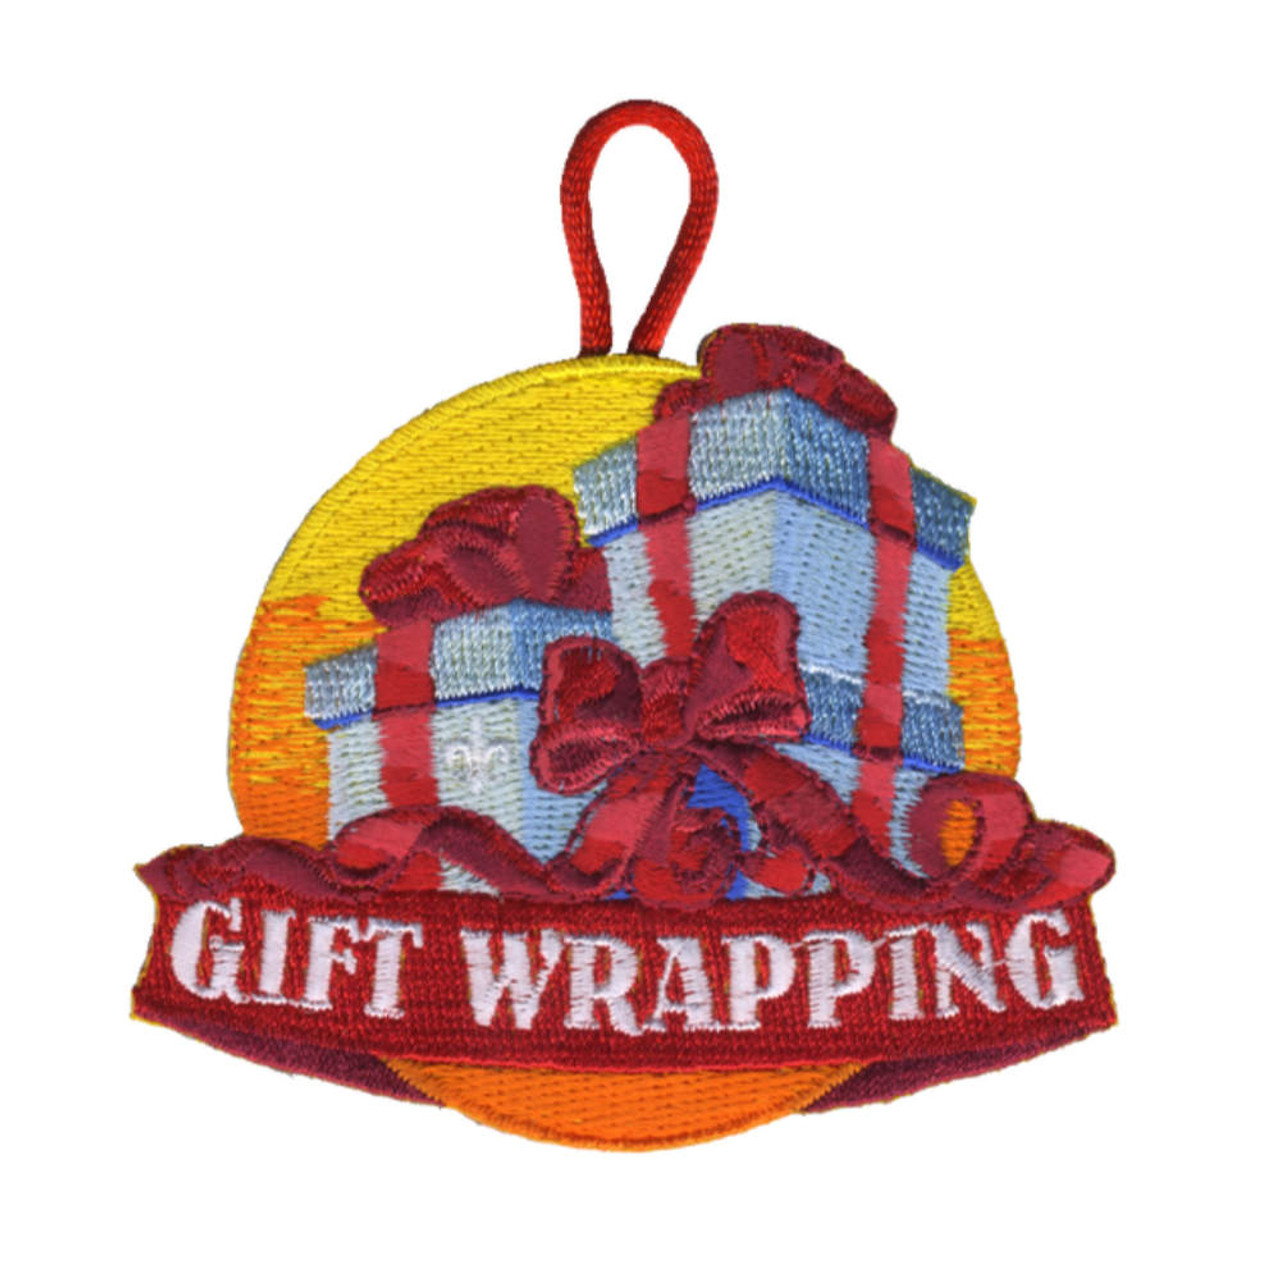 Fun and Stylish Christmas Gift Wrapping Ideas - The Navage Patch